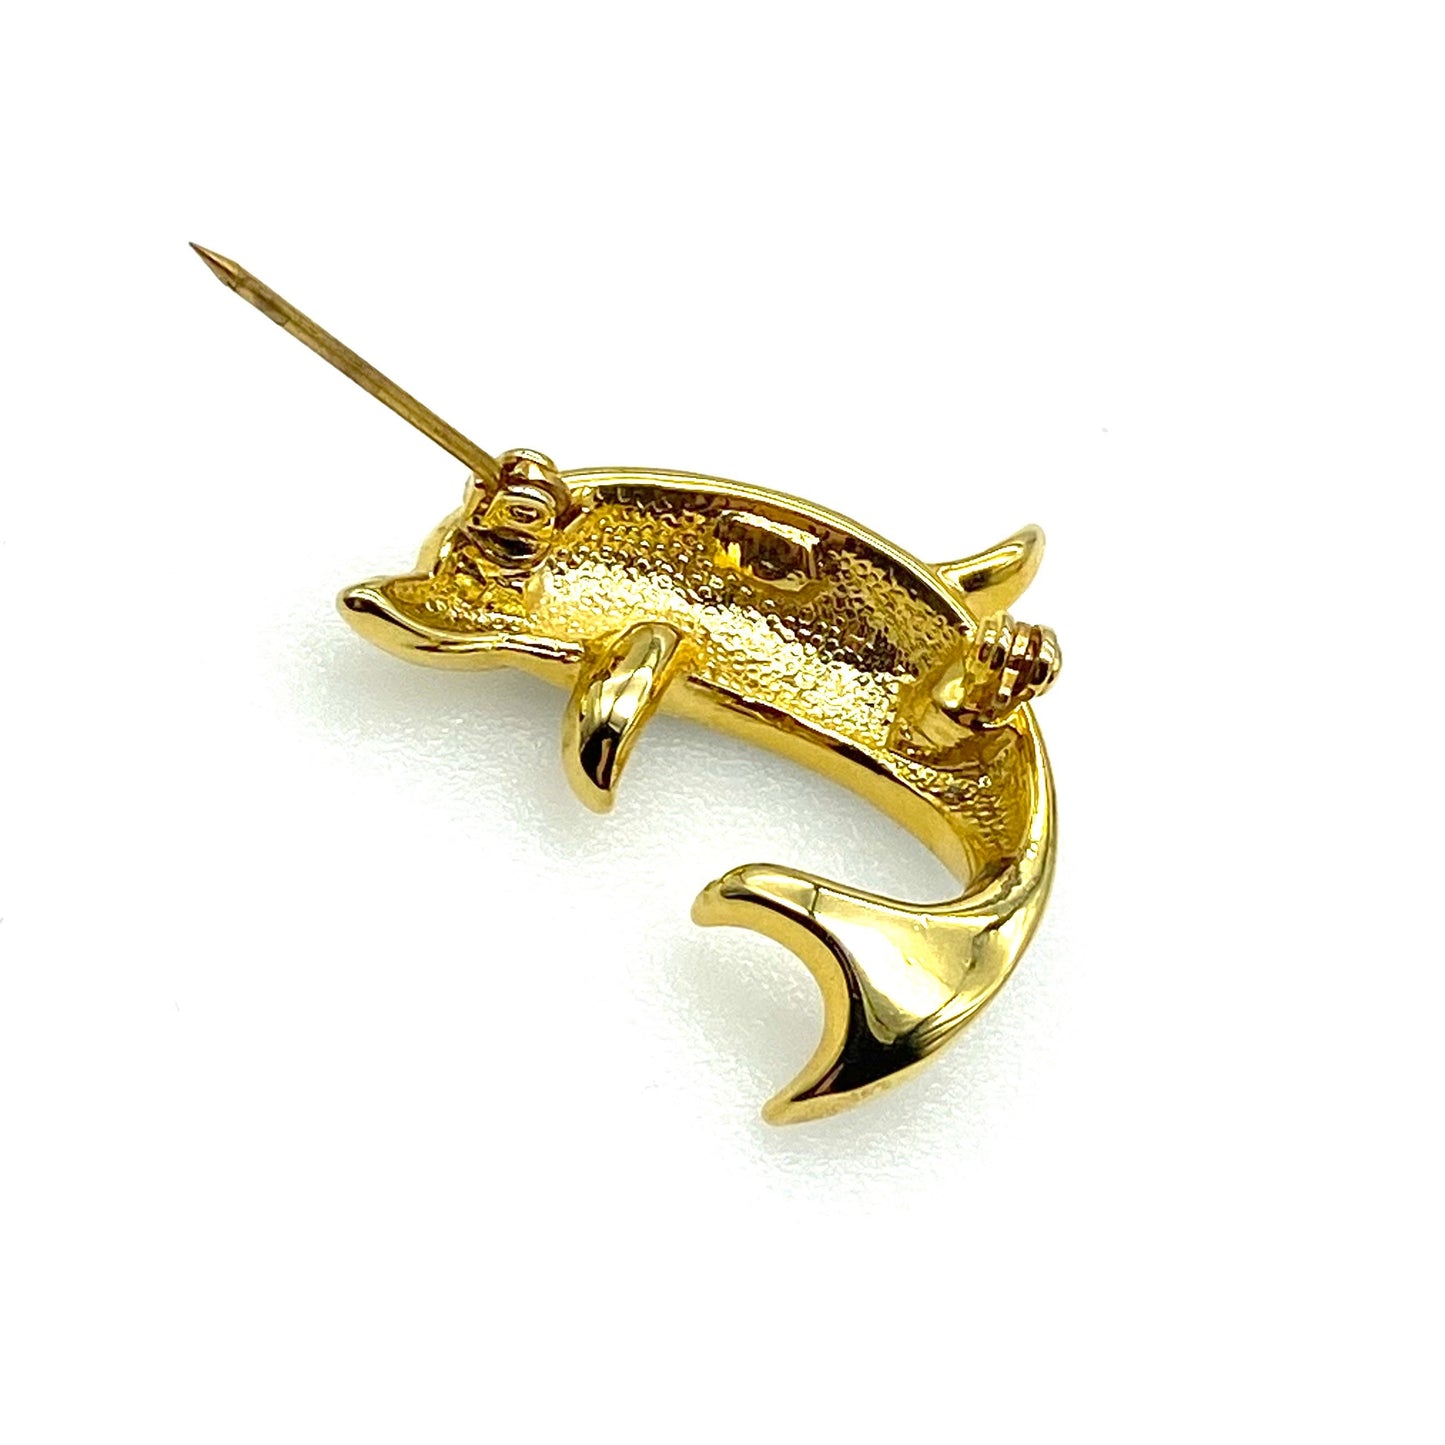 Unsigned Attwood and Sawyer 22ct Gold Plated Enamel and Swarovski Crystal Dolphin Brooch